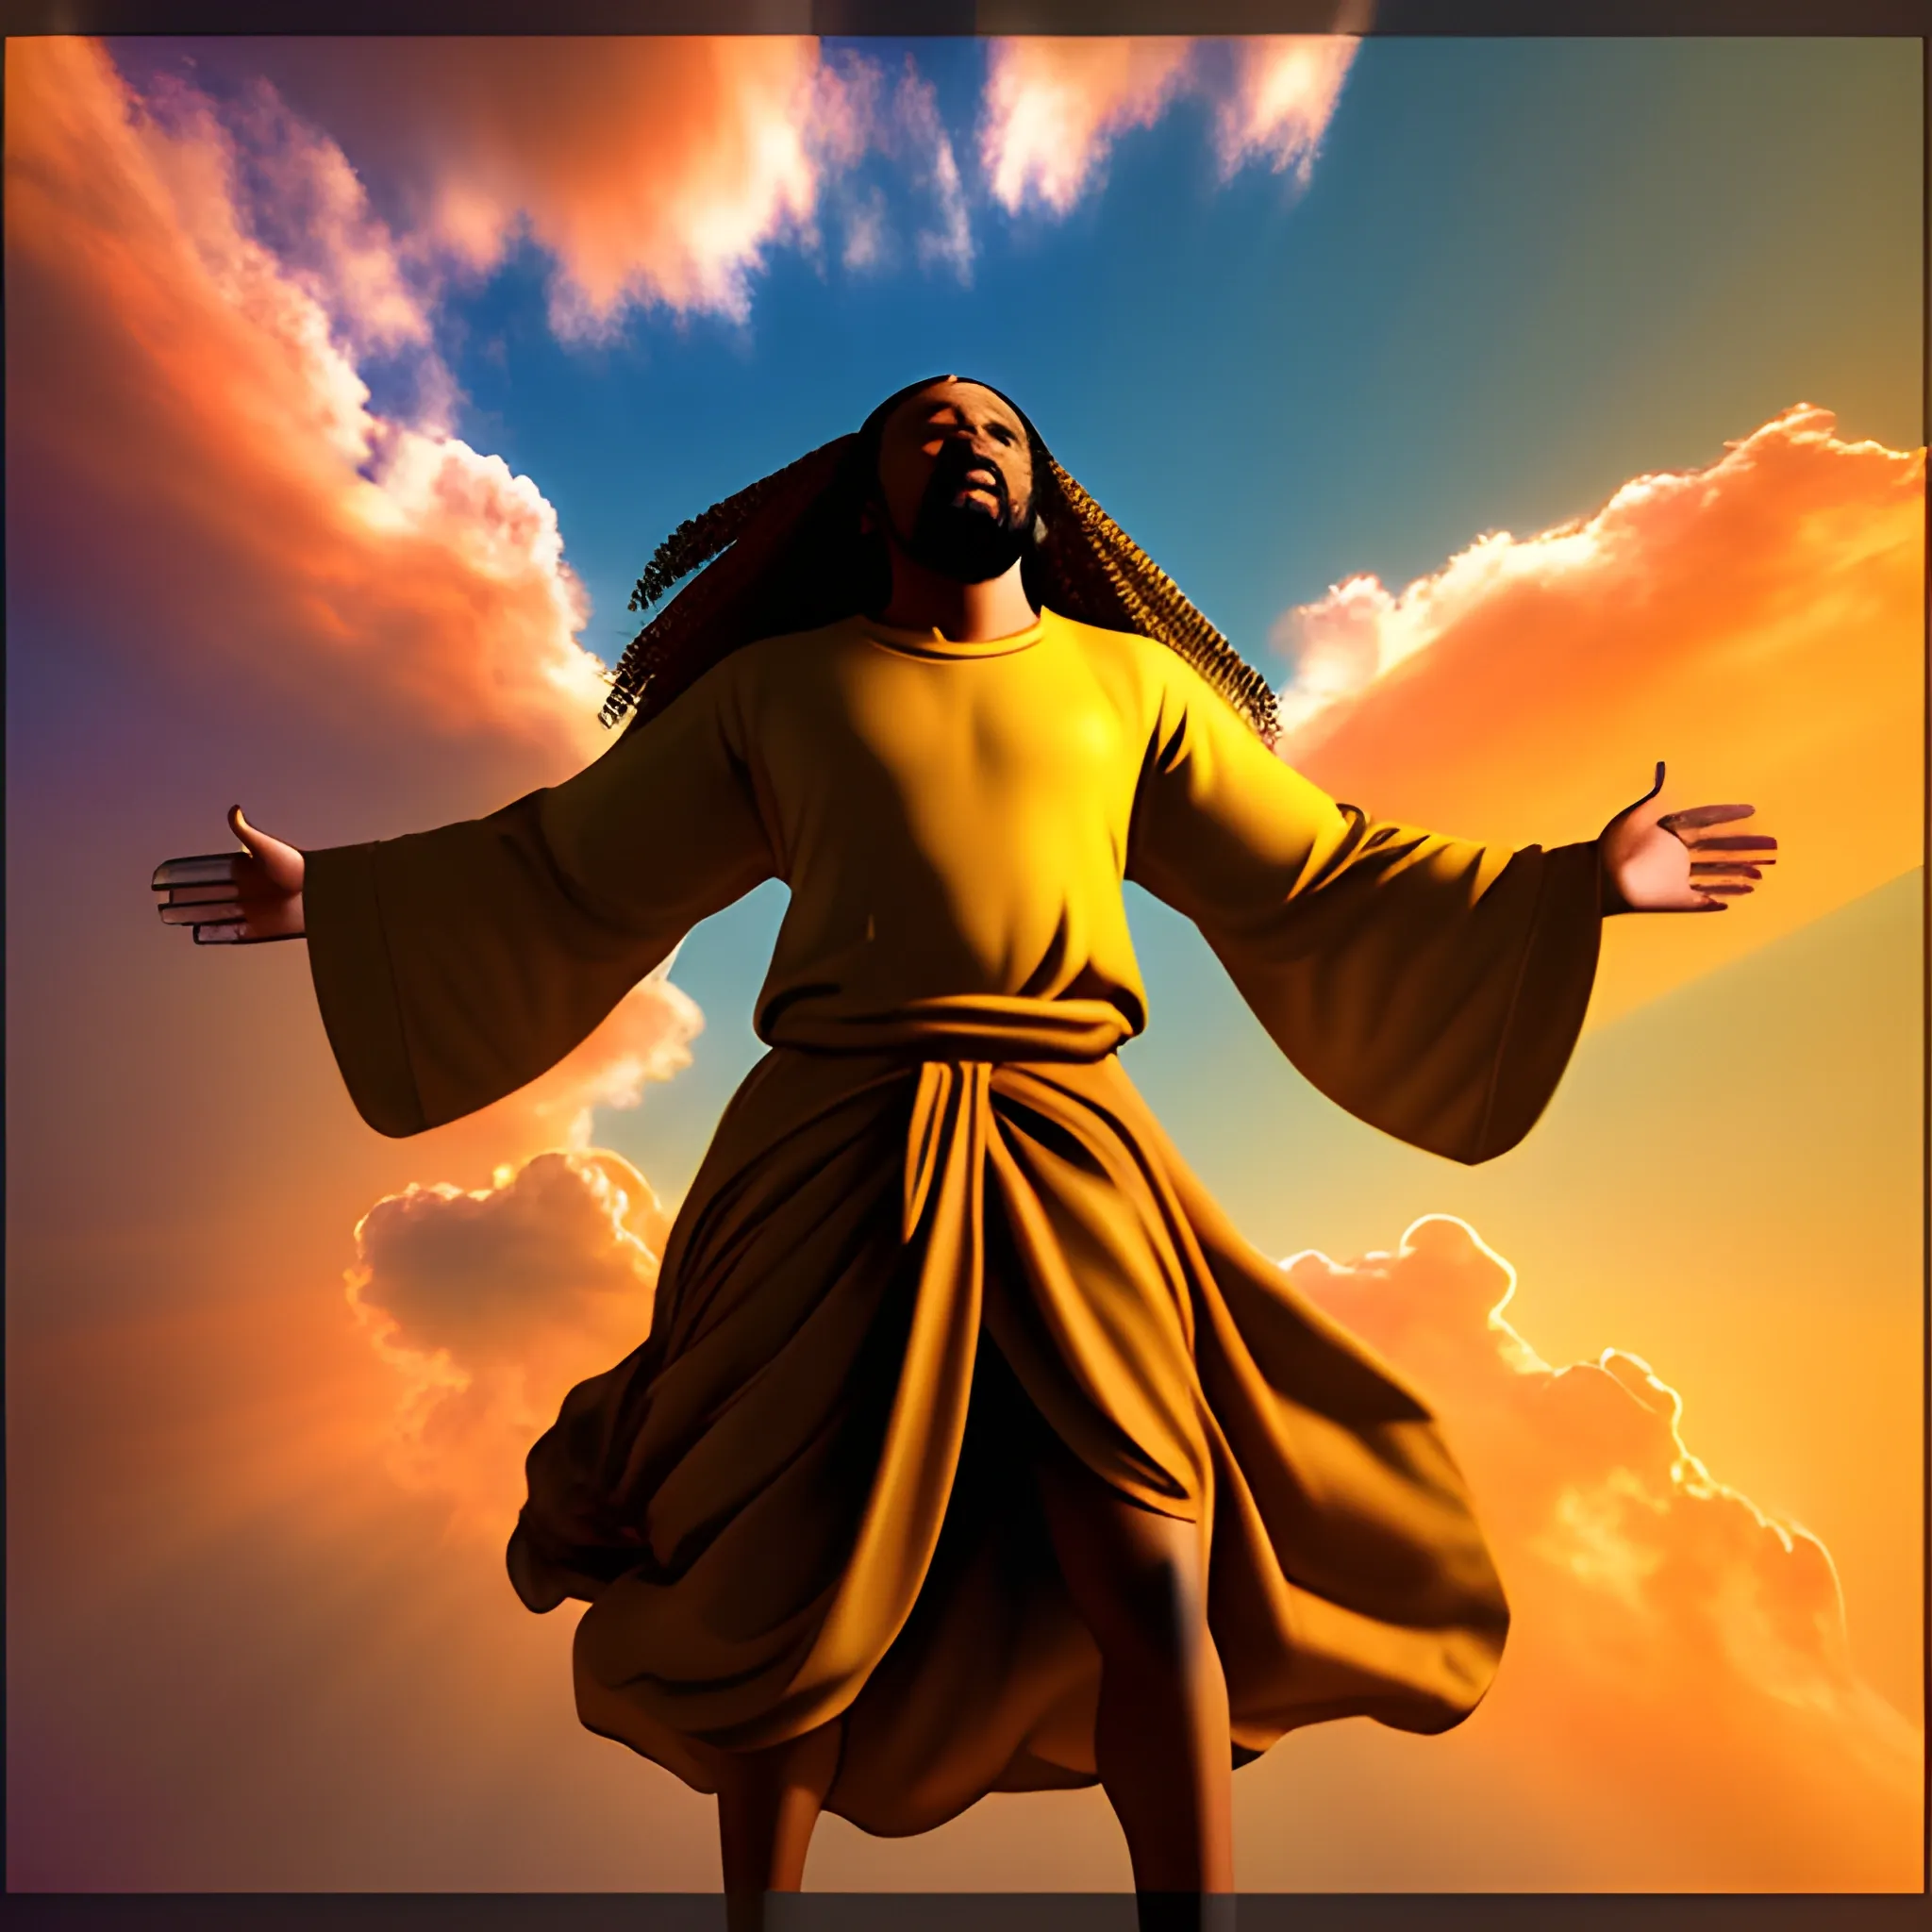 African American Jesus with brown skin and long golden hair surrounded by light flying into the sky full of beautiful colors and hand of GOD reaching down from a cloud, 3D